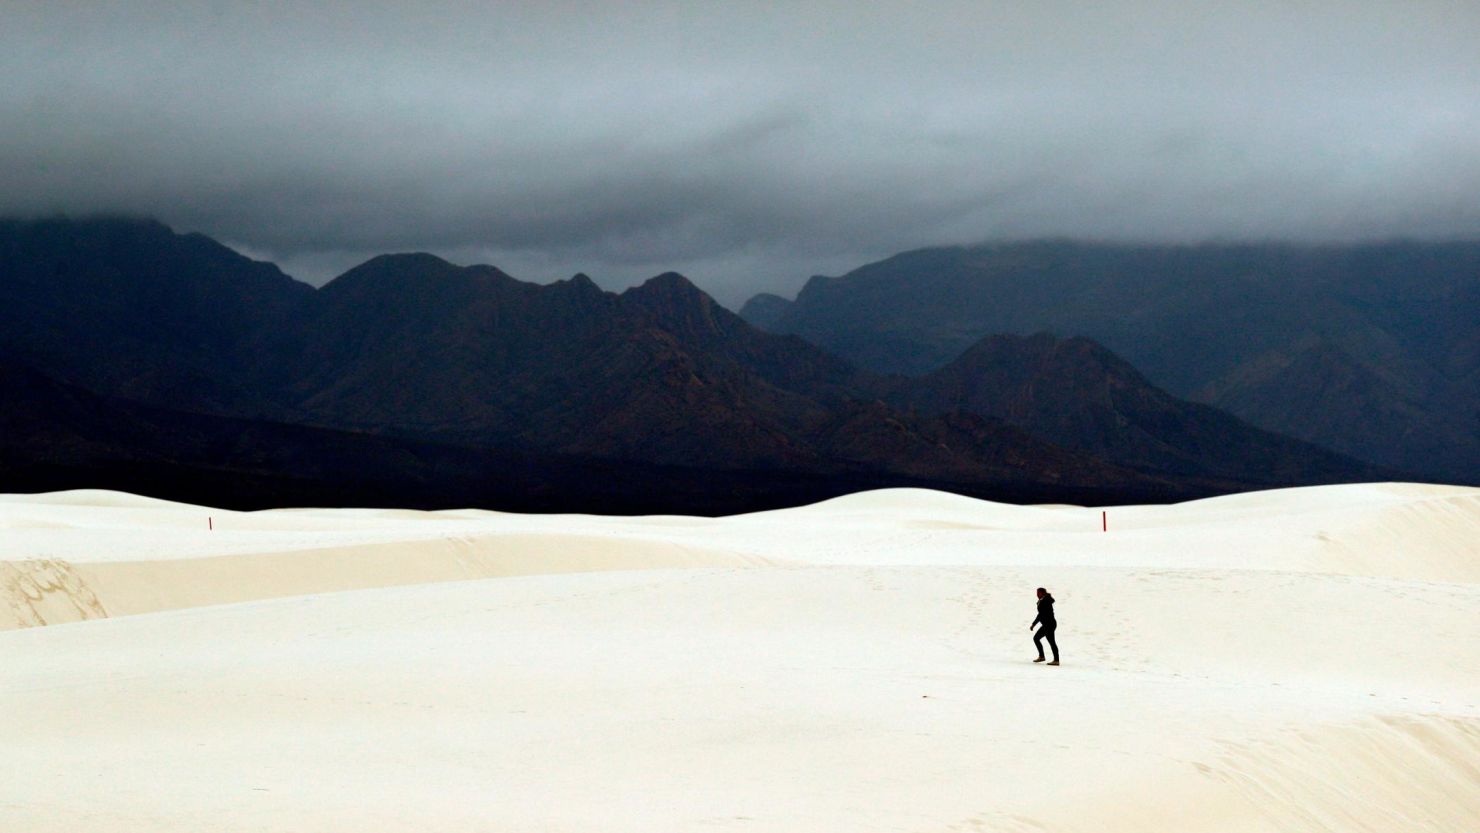 A visitor walks across dunes at White Sands National Monument as a rain storm passes near Alamogordo, New Mexico, on February 10, 2019.